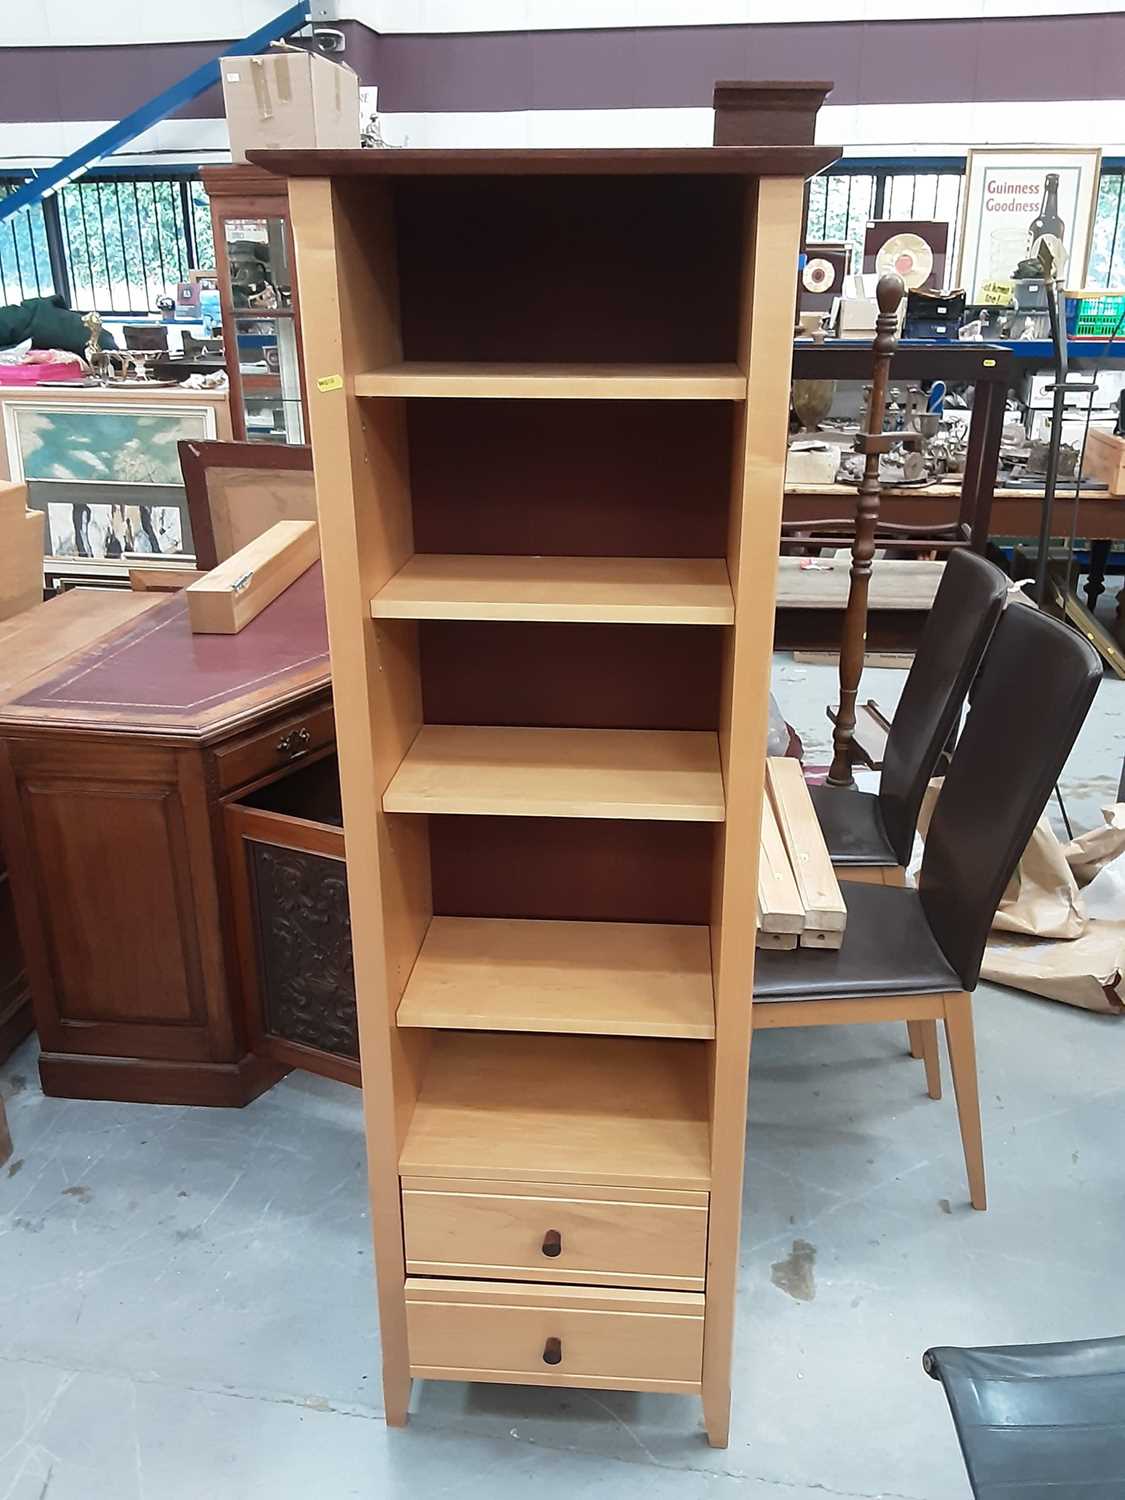 Lot 883 - Contemporary beech effect bookcase with adjustable shelves and two drawers below, 54cm wide, 33cm deep, 162.5cm high